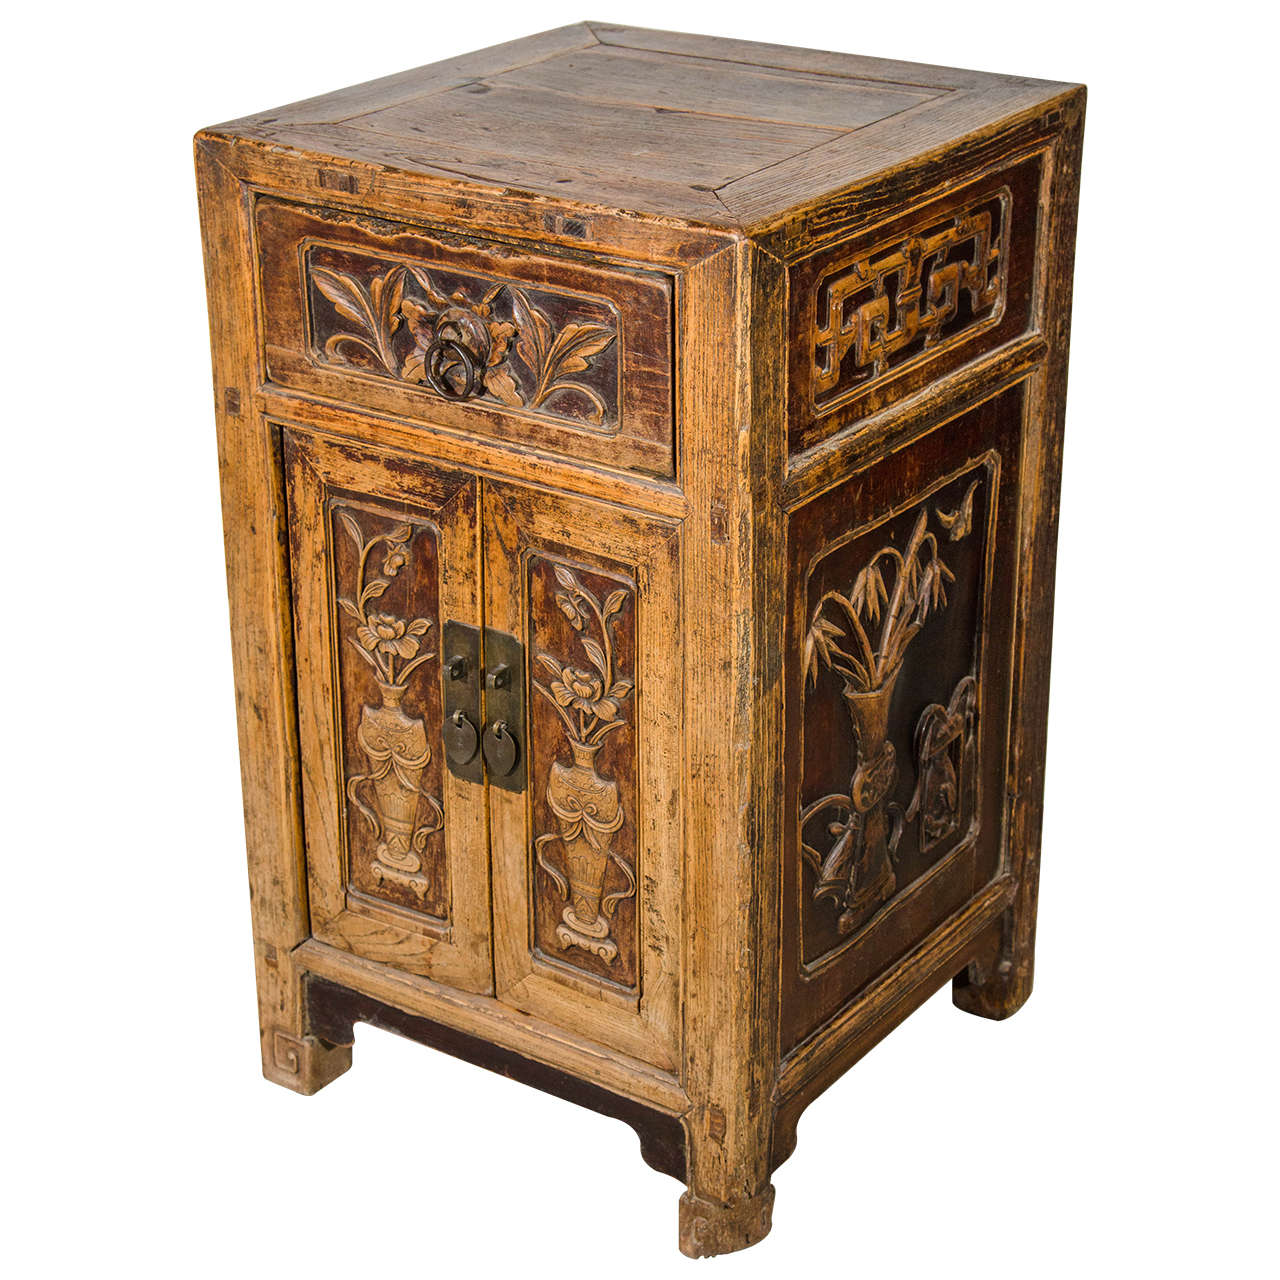 Unusual, Finely Carved 19th Century Cabinet